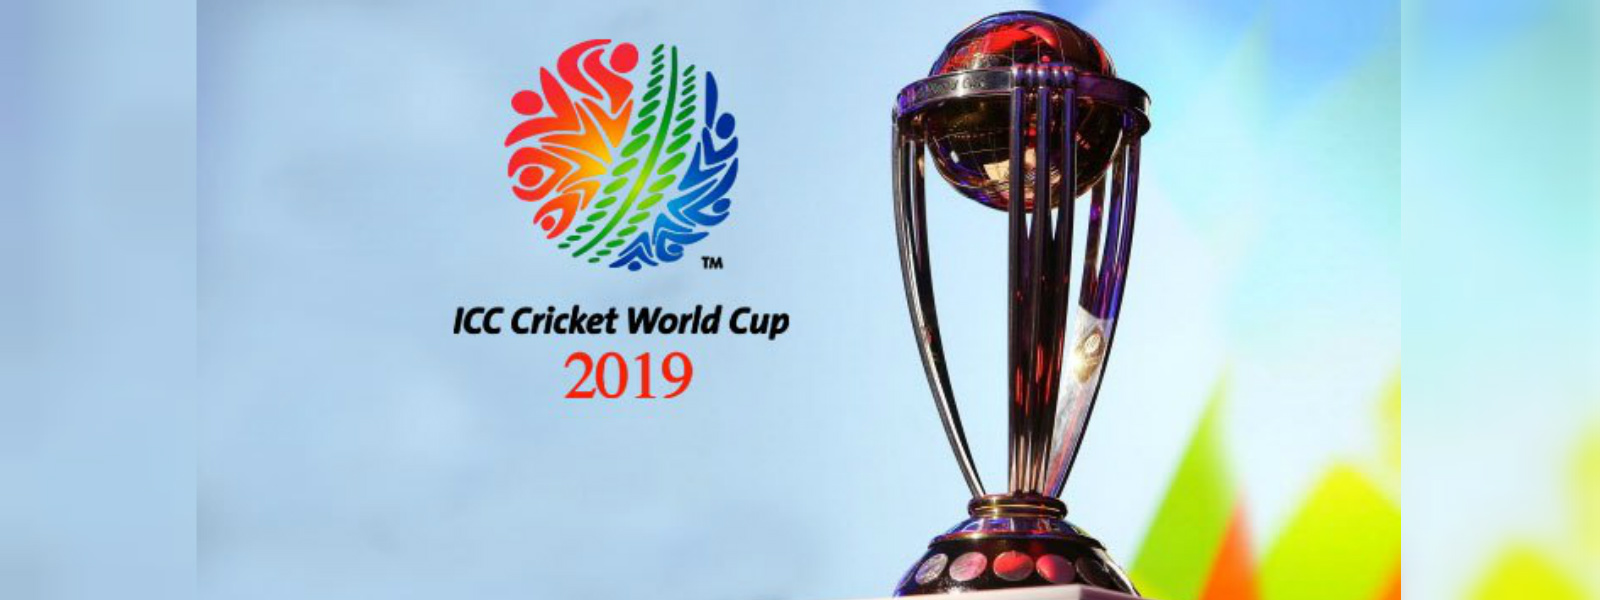 WCC: India vs New Zealand to resume their match